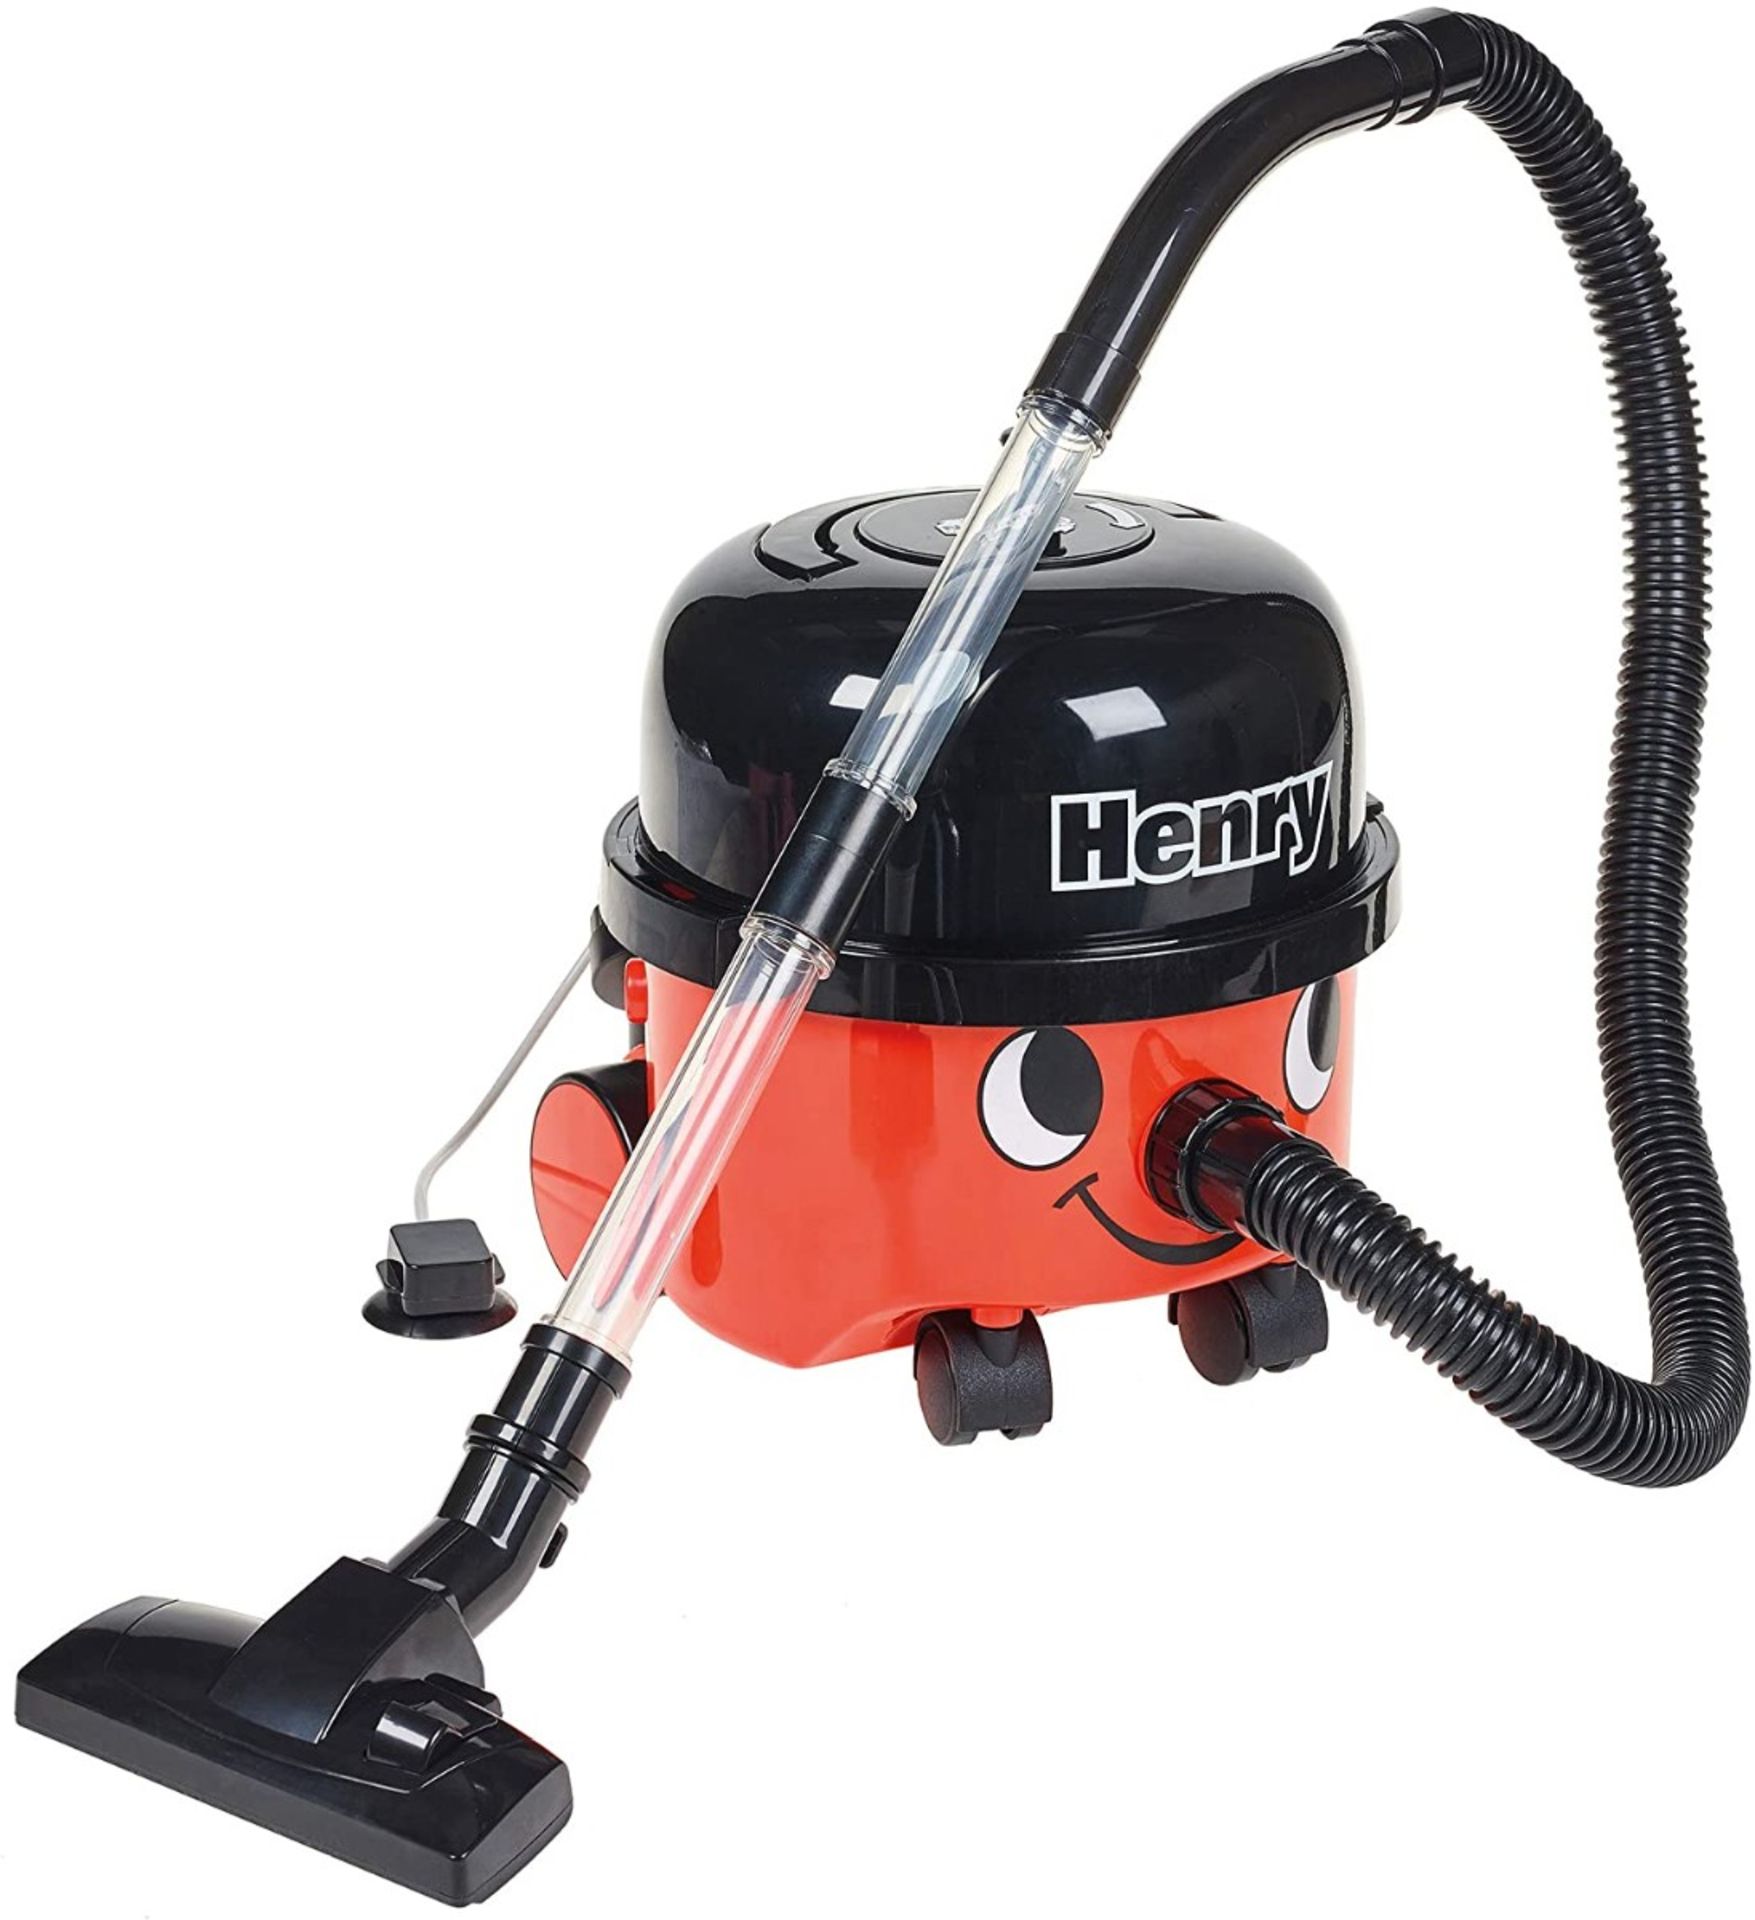 RRP -£22.00 Casdon Henry Vacuum Cleaner | Toy Vacuum Cleaner For Children Aged 3